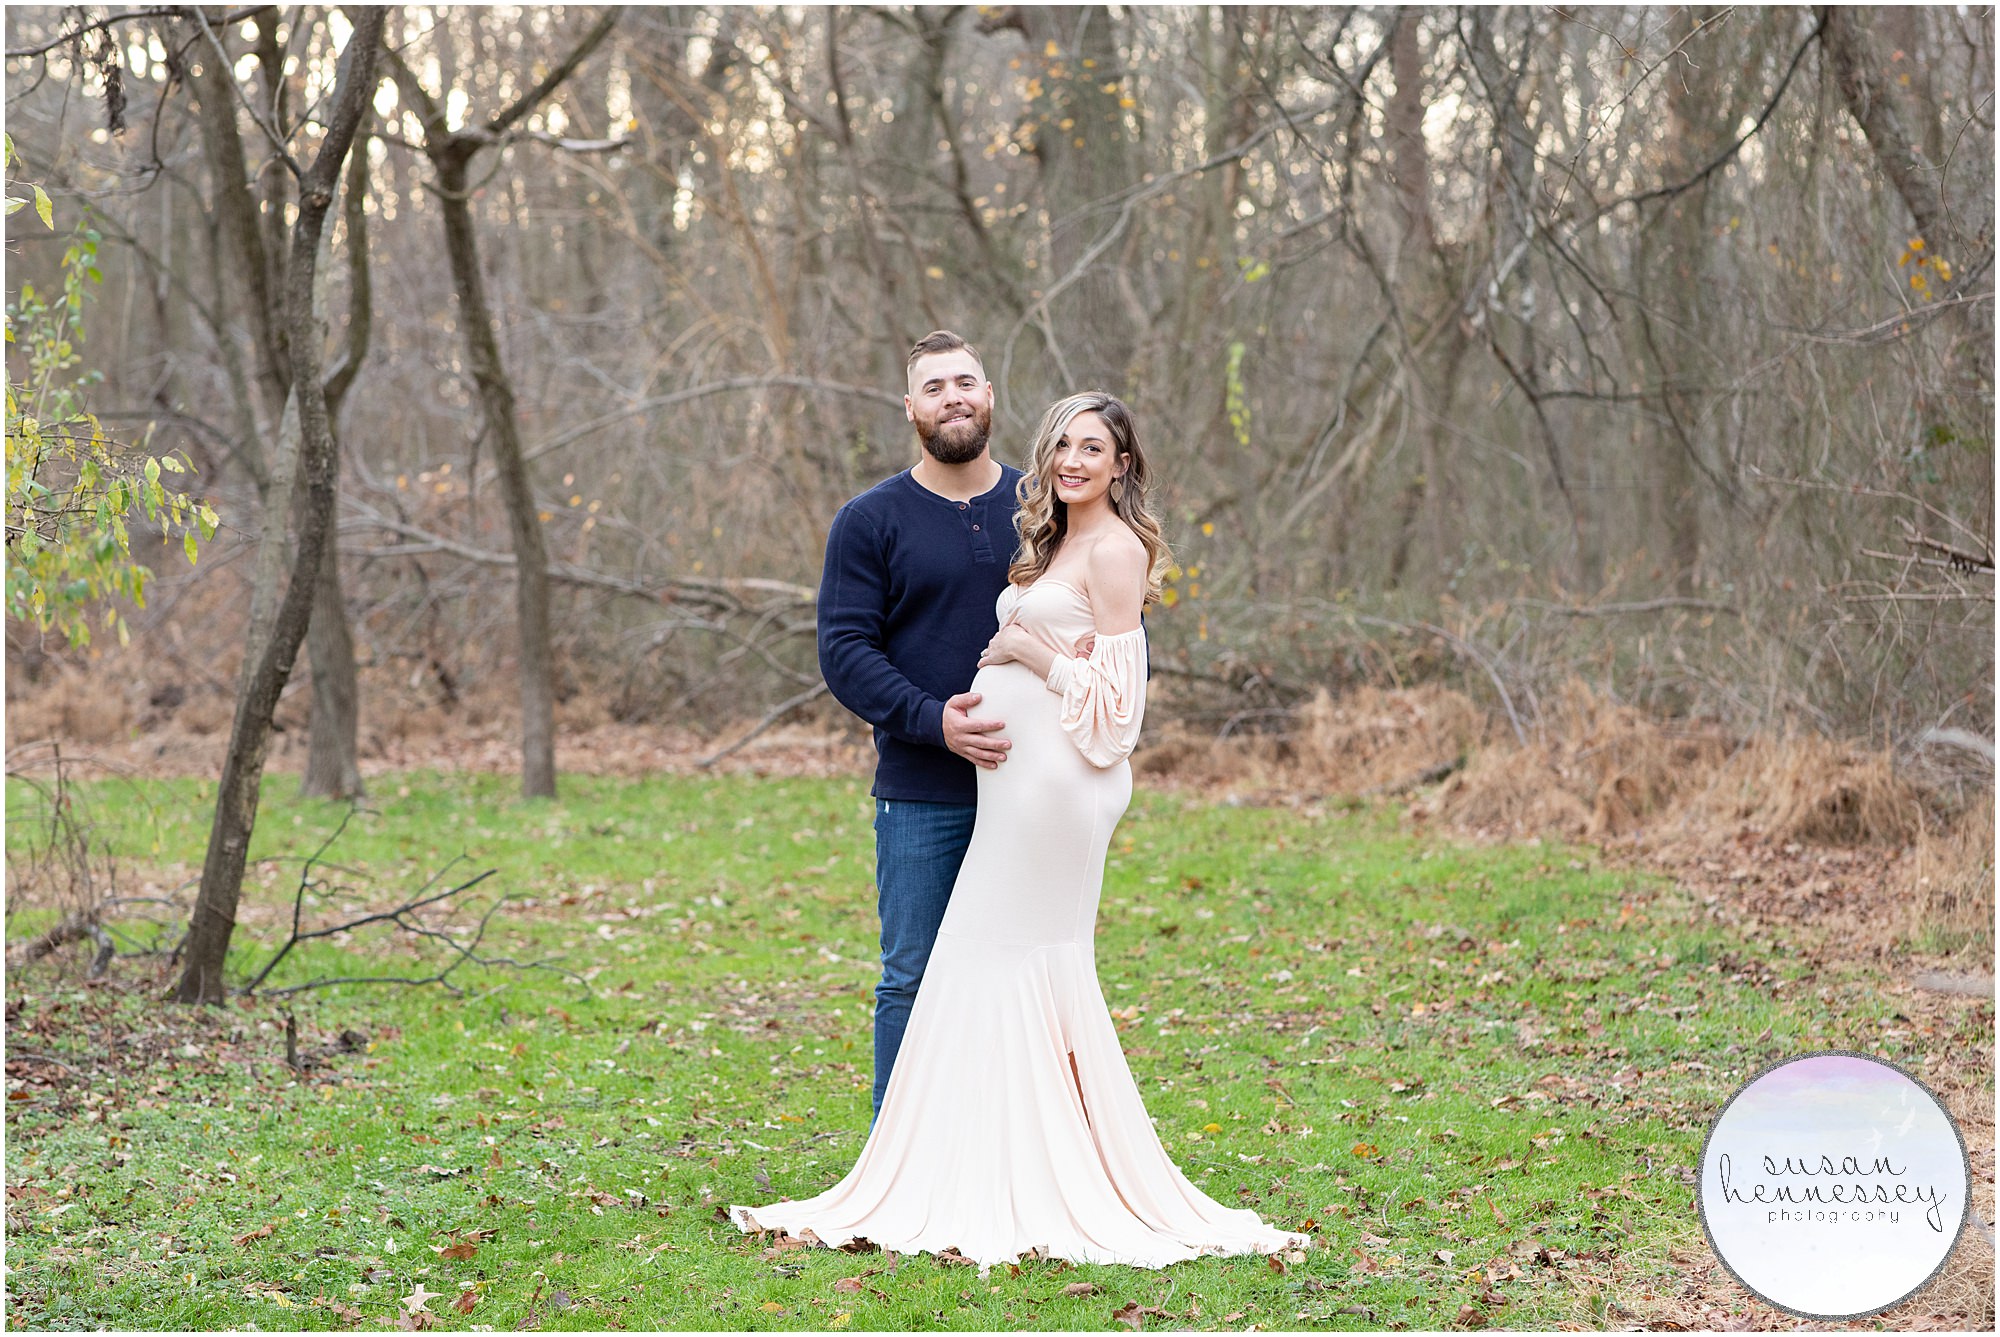 A winter maternity session at Boundary Creek in Moorestown, NJ